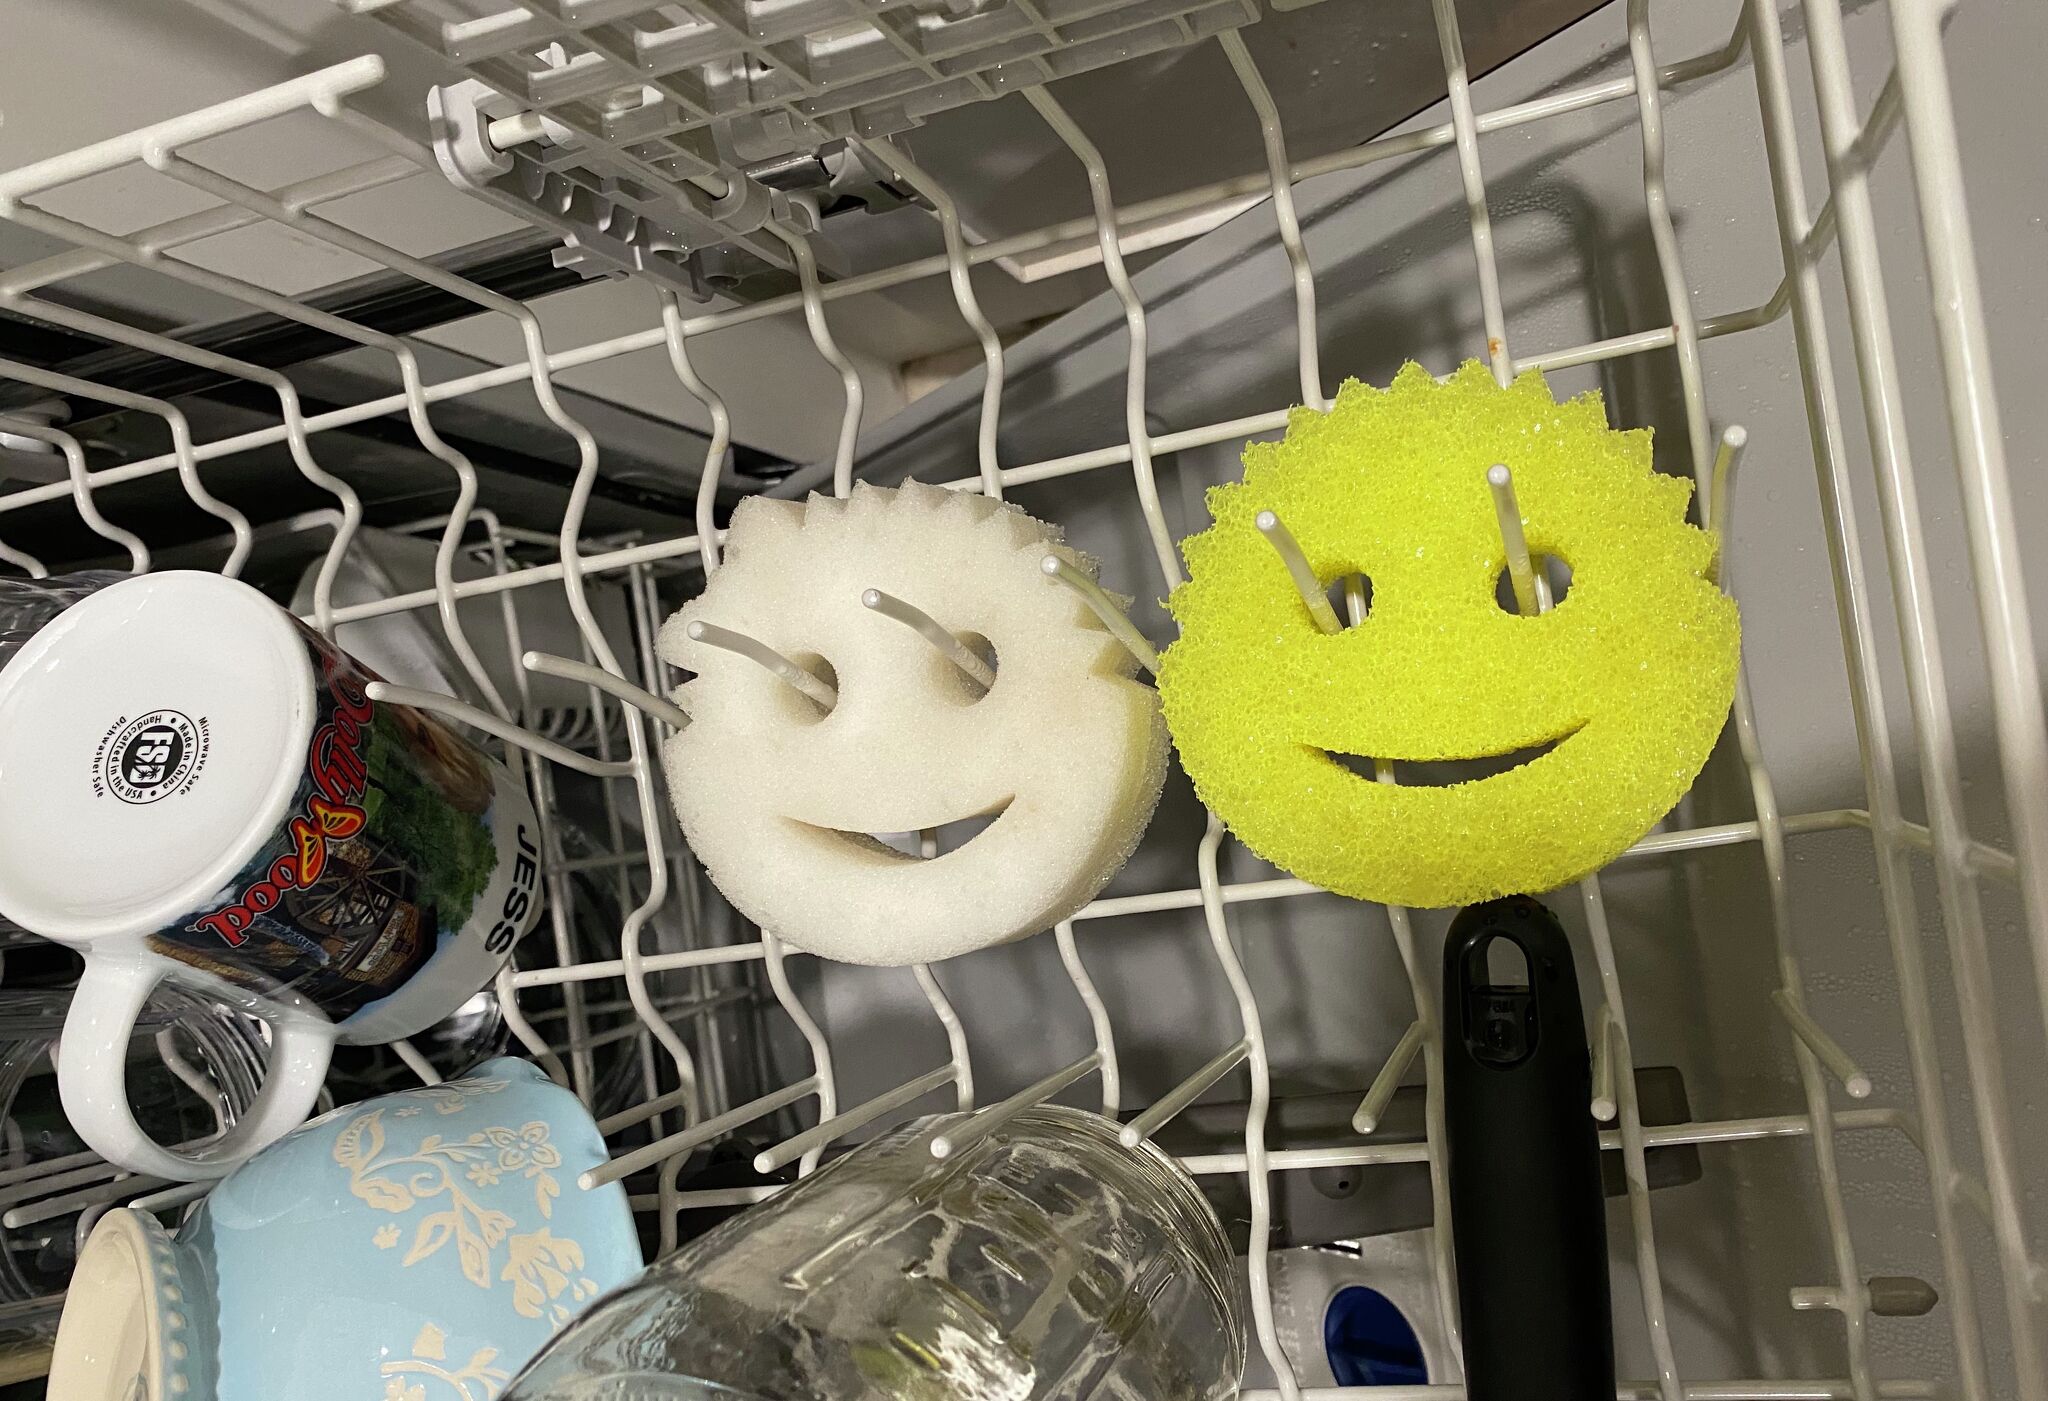 5 Reasons You Should Have a Scrub Daddy Sponge in Your Kitchen